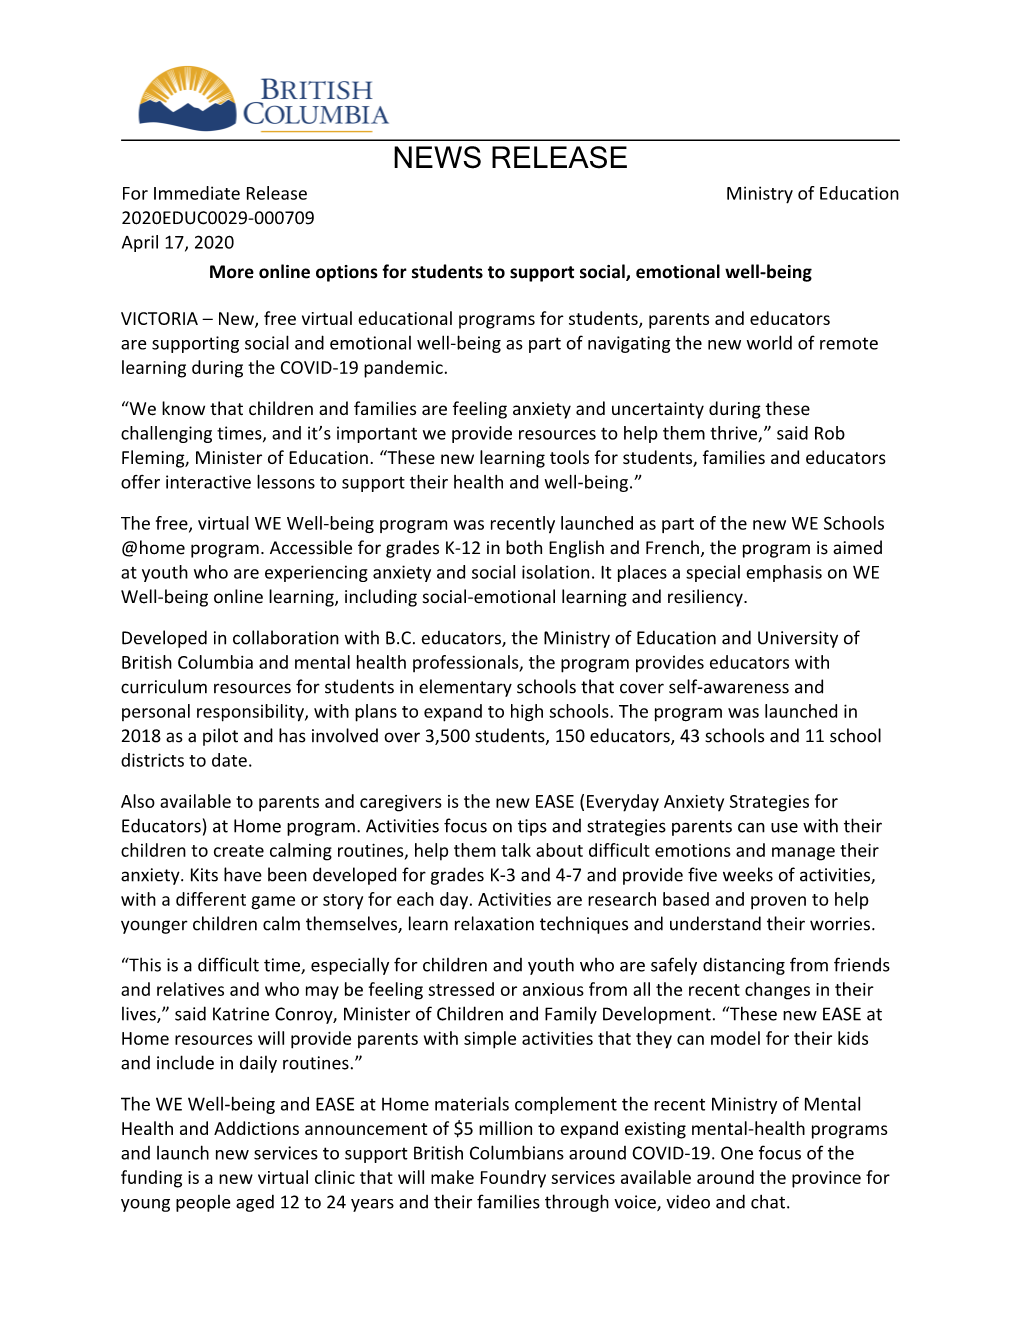 NEWS RELEASE for Immediate Release Ministry of Education 2020EDUC0029-000709 April 17, 2020 More Online Options for Students to Support Social, Emotional Well-Being